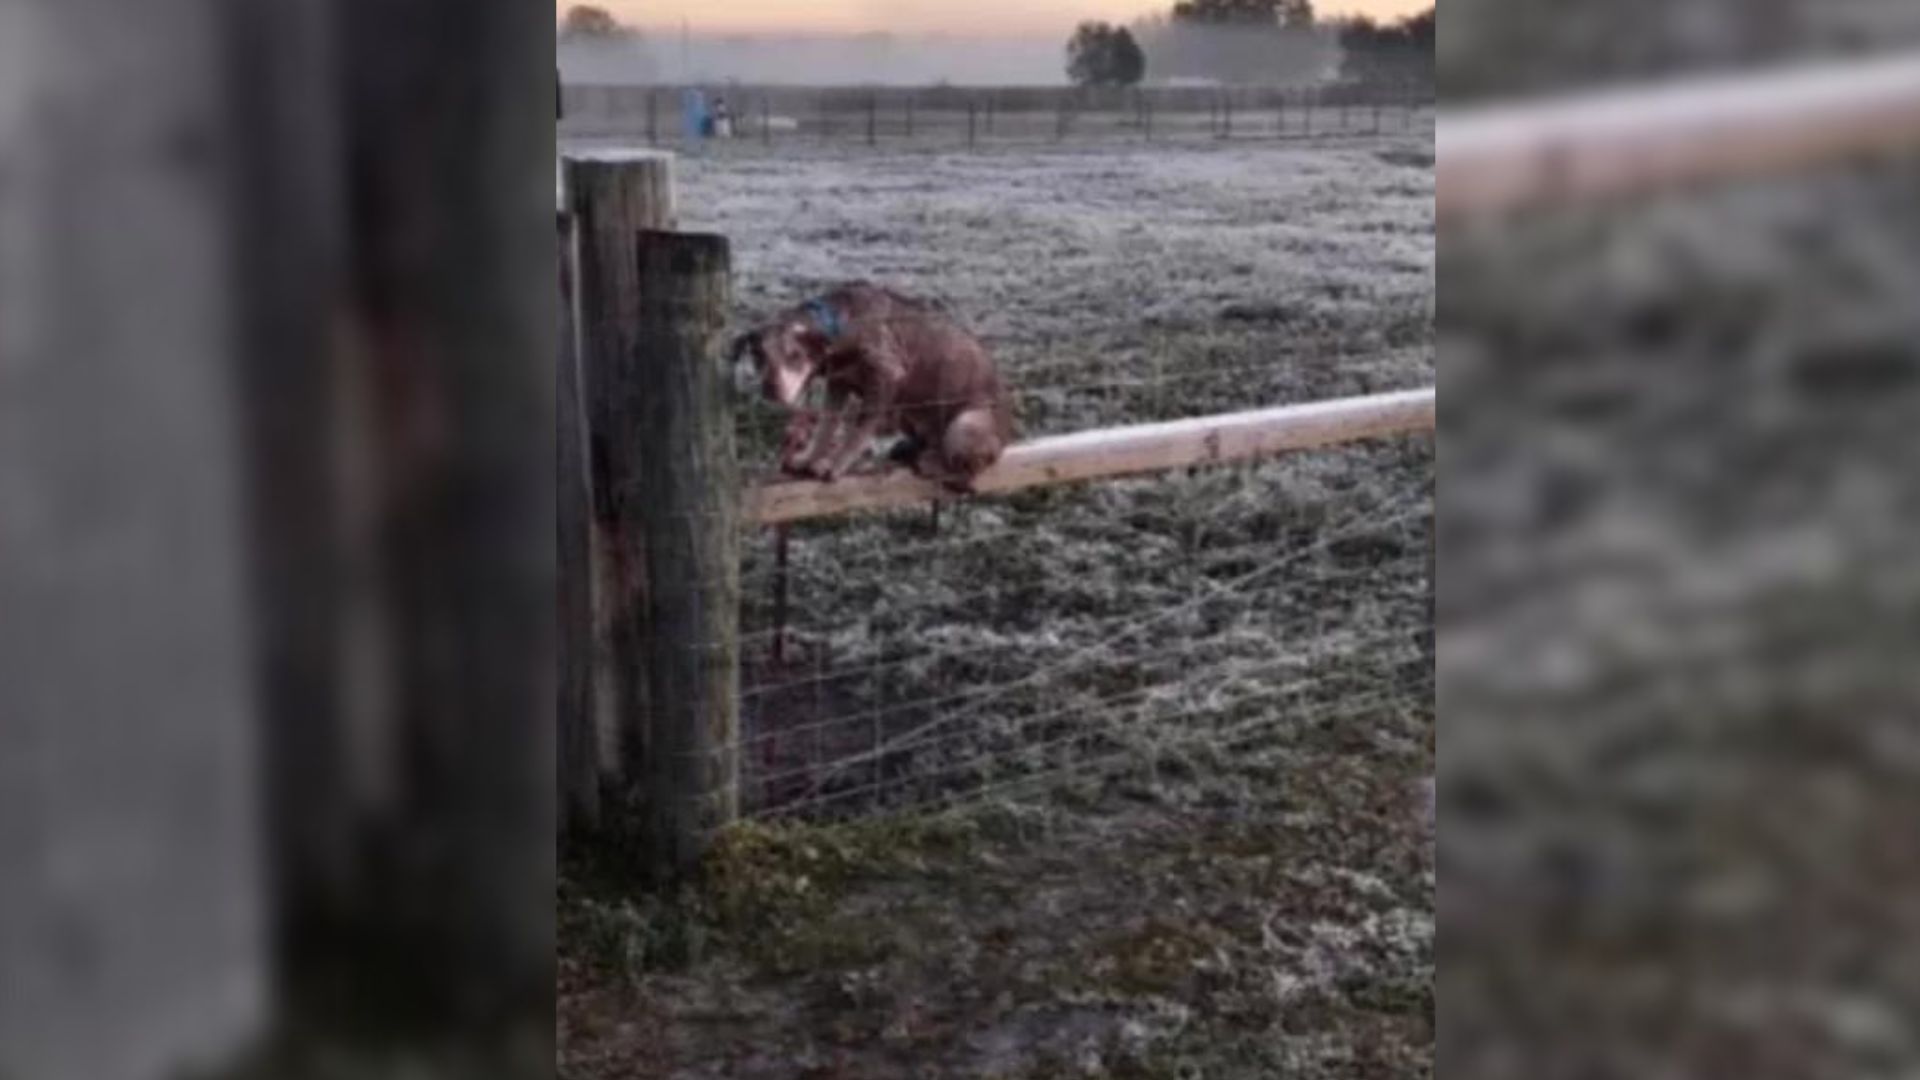 This Poor Hairless Dog Was Tied To A Fence In Horrible Weather Until Someone Came To His Aid